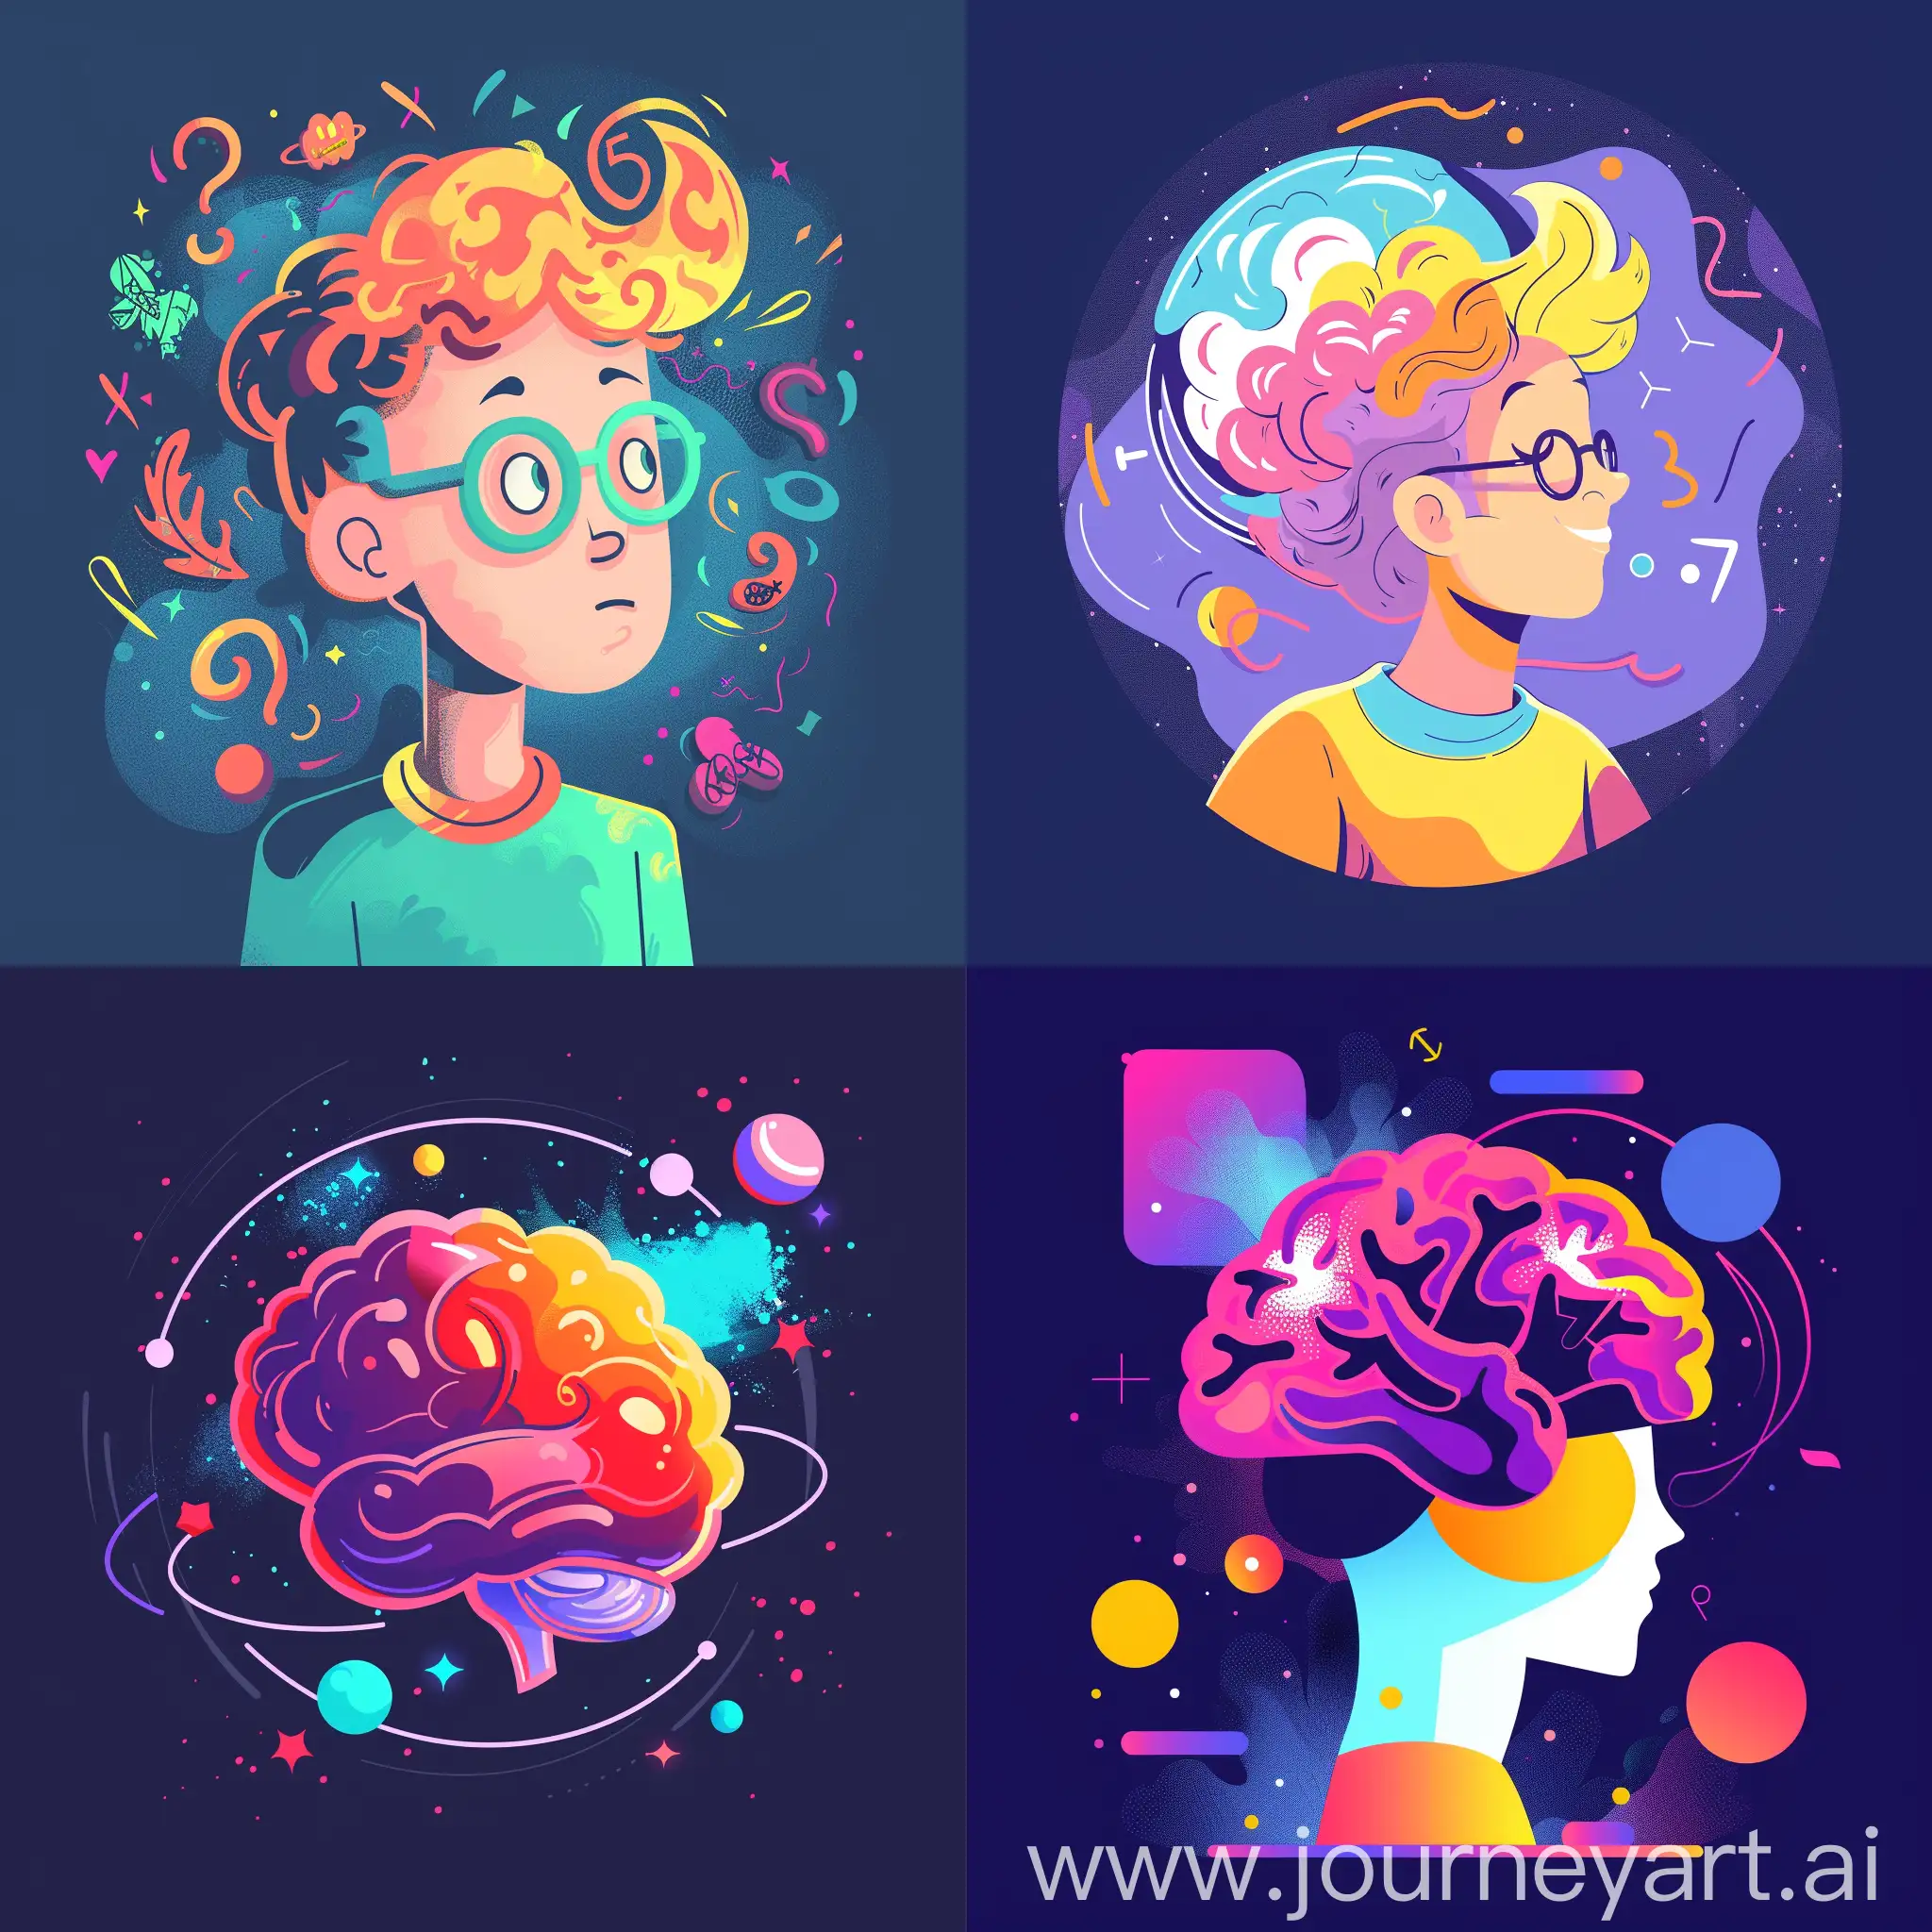 Generate an avatar for a Telegram channel called "ГоловоФакт" (BrainFact). The channel is focused on quizzes, puzzles, and interesting facts. The avatar should be engaging and convey the theme of brain teasers and knowledge.